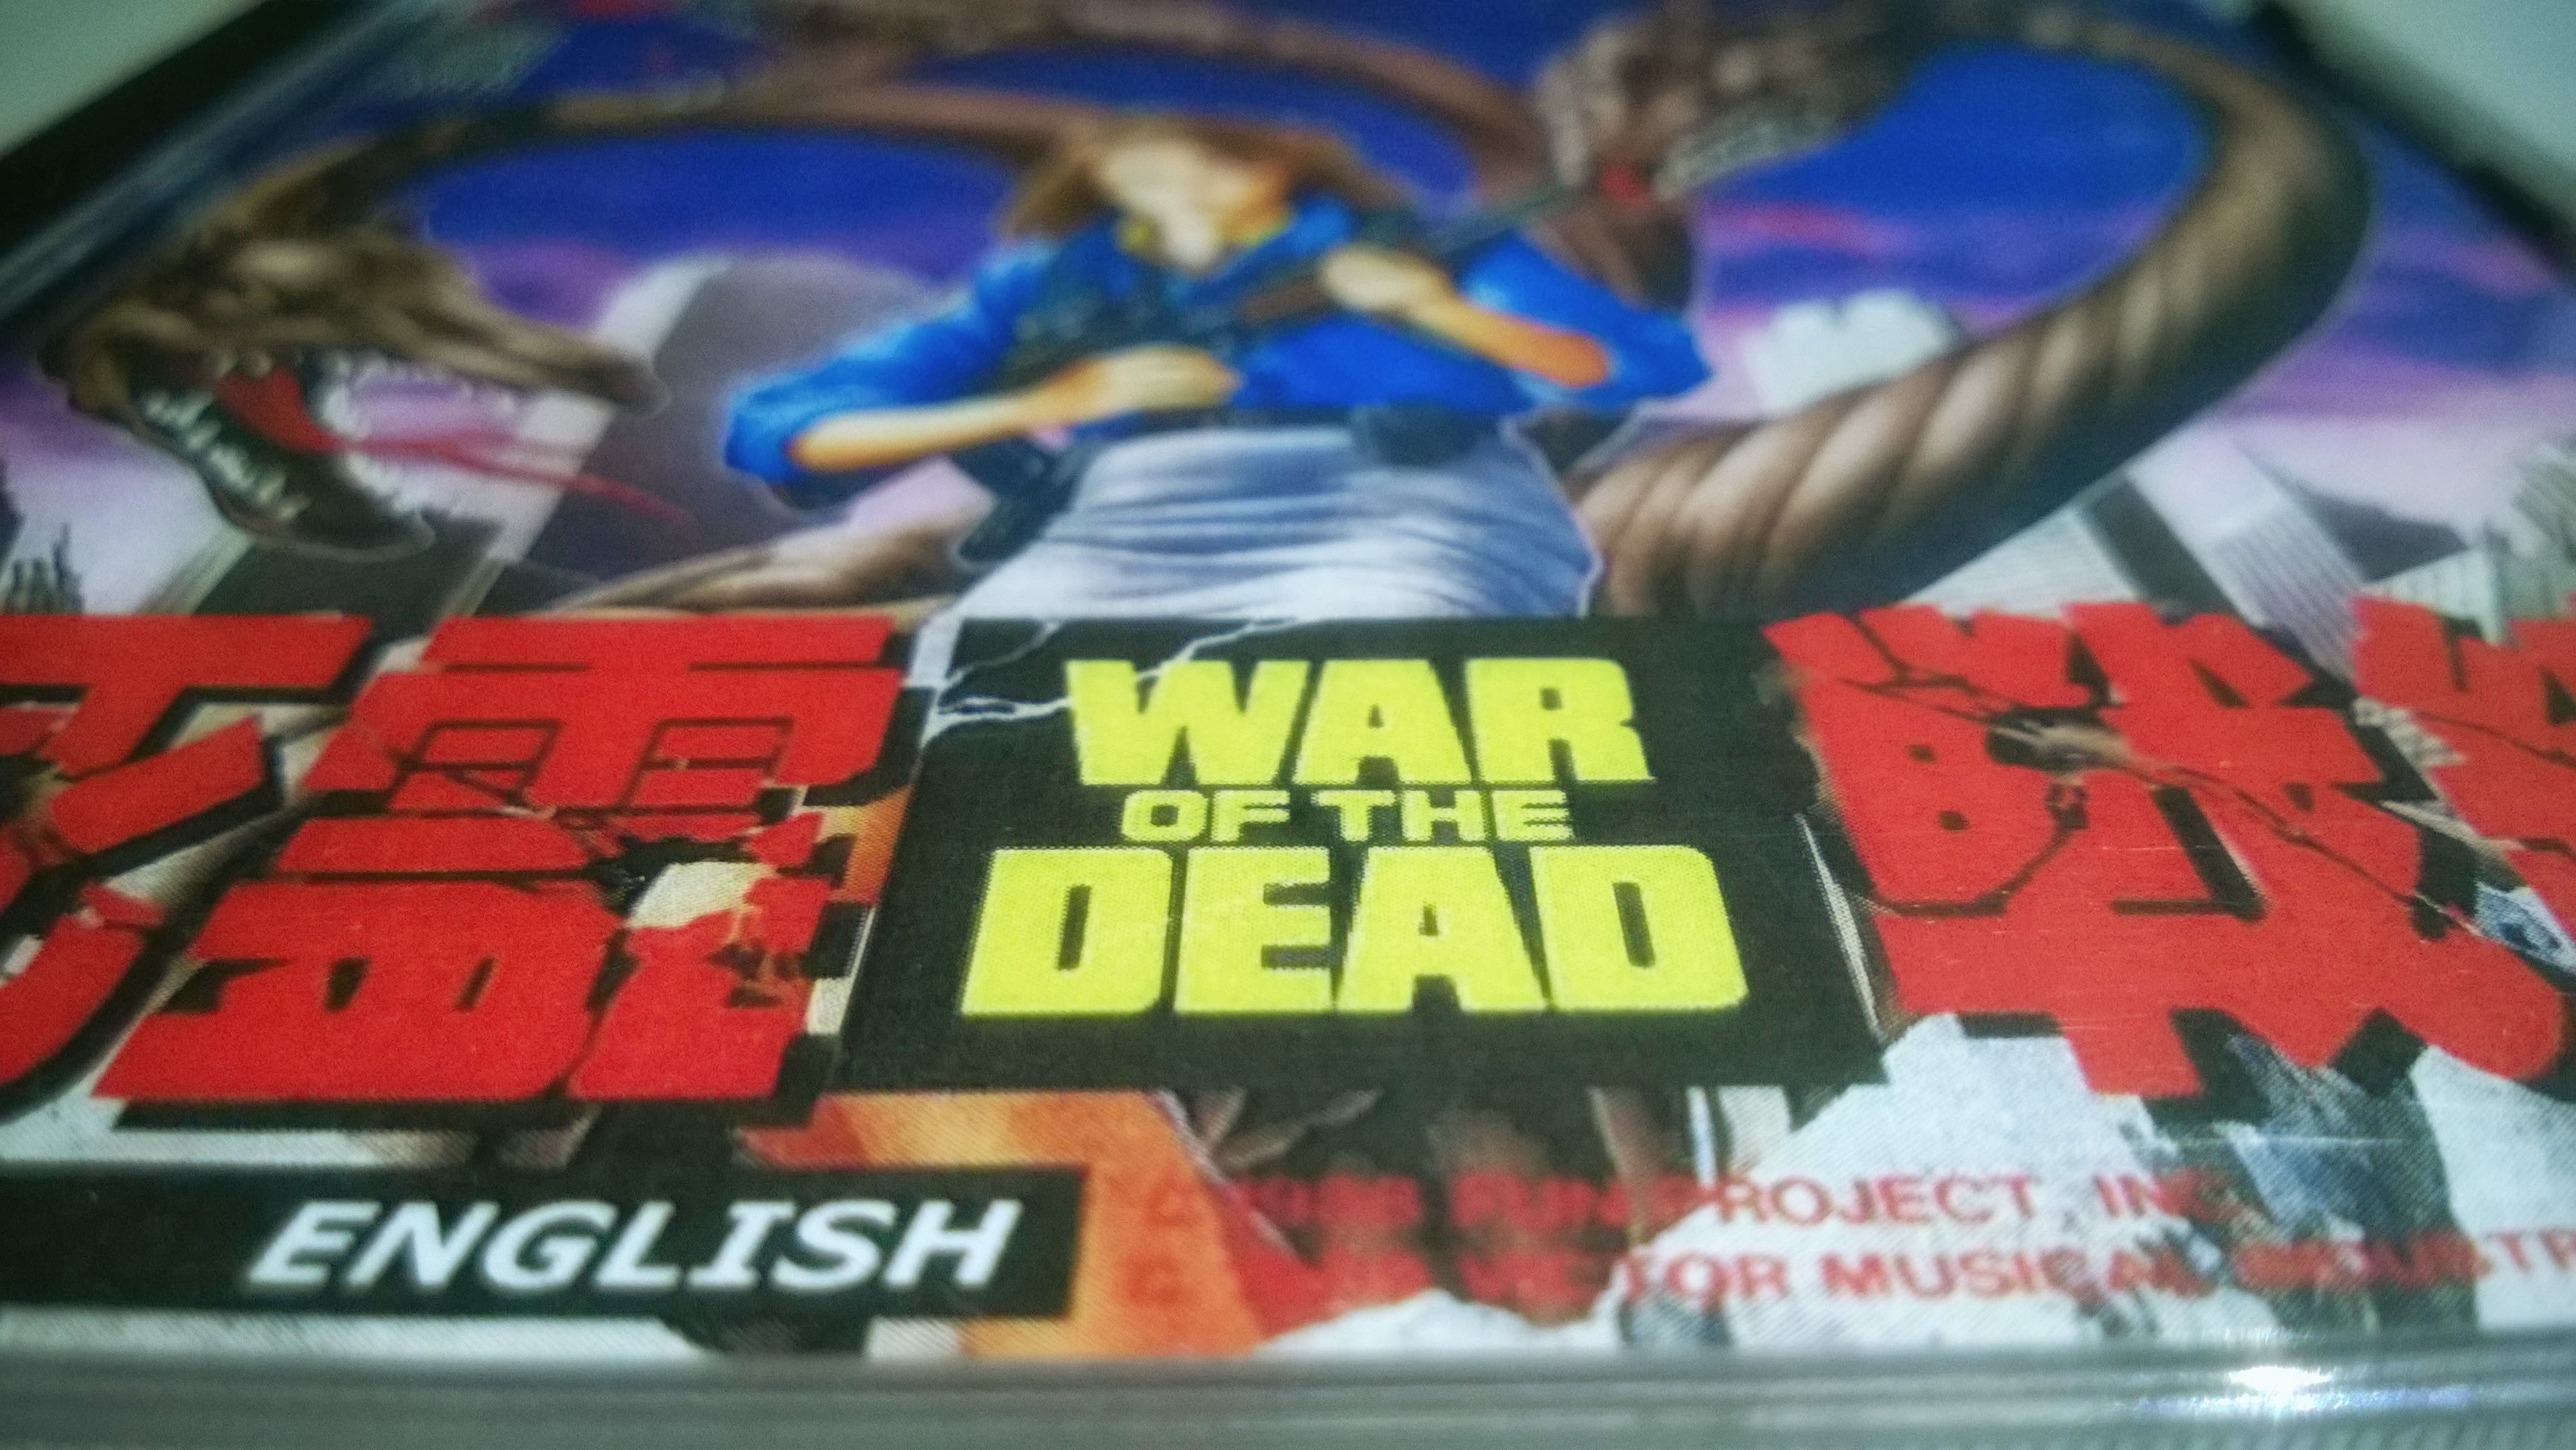 New Game Alert - War of the Dead English Repro for TurboGrafx-16